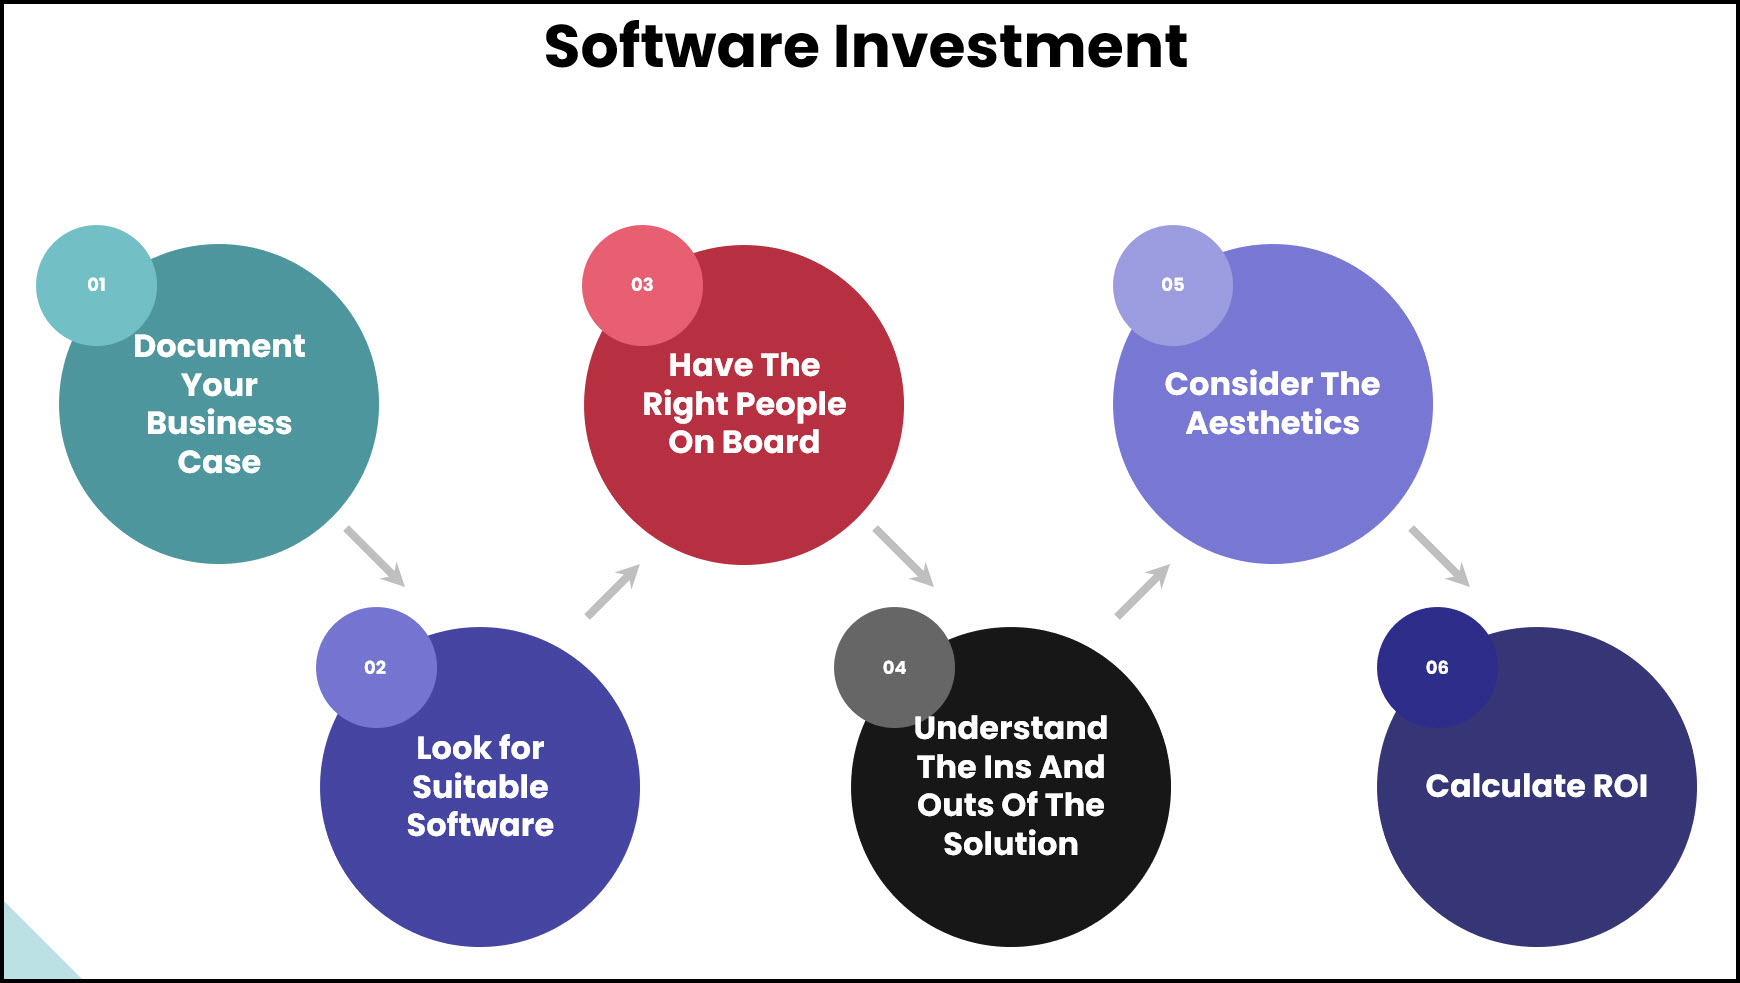 Quality Assurance Solutions shares some tried-and-tested methods on how to get the best out of your planned software investment: 